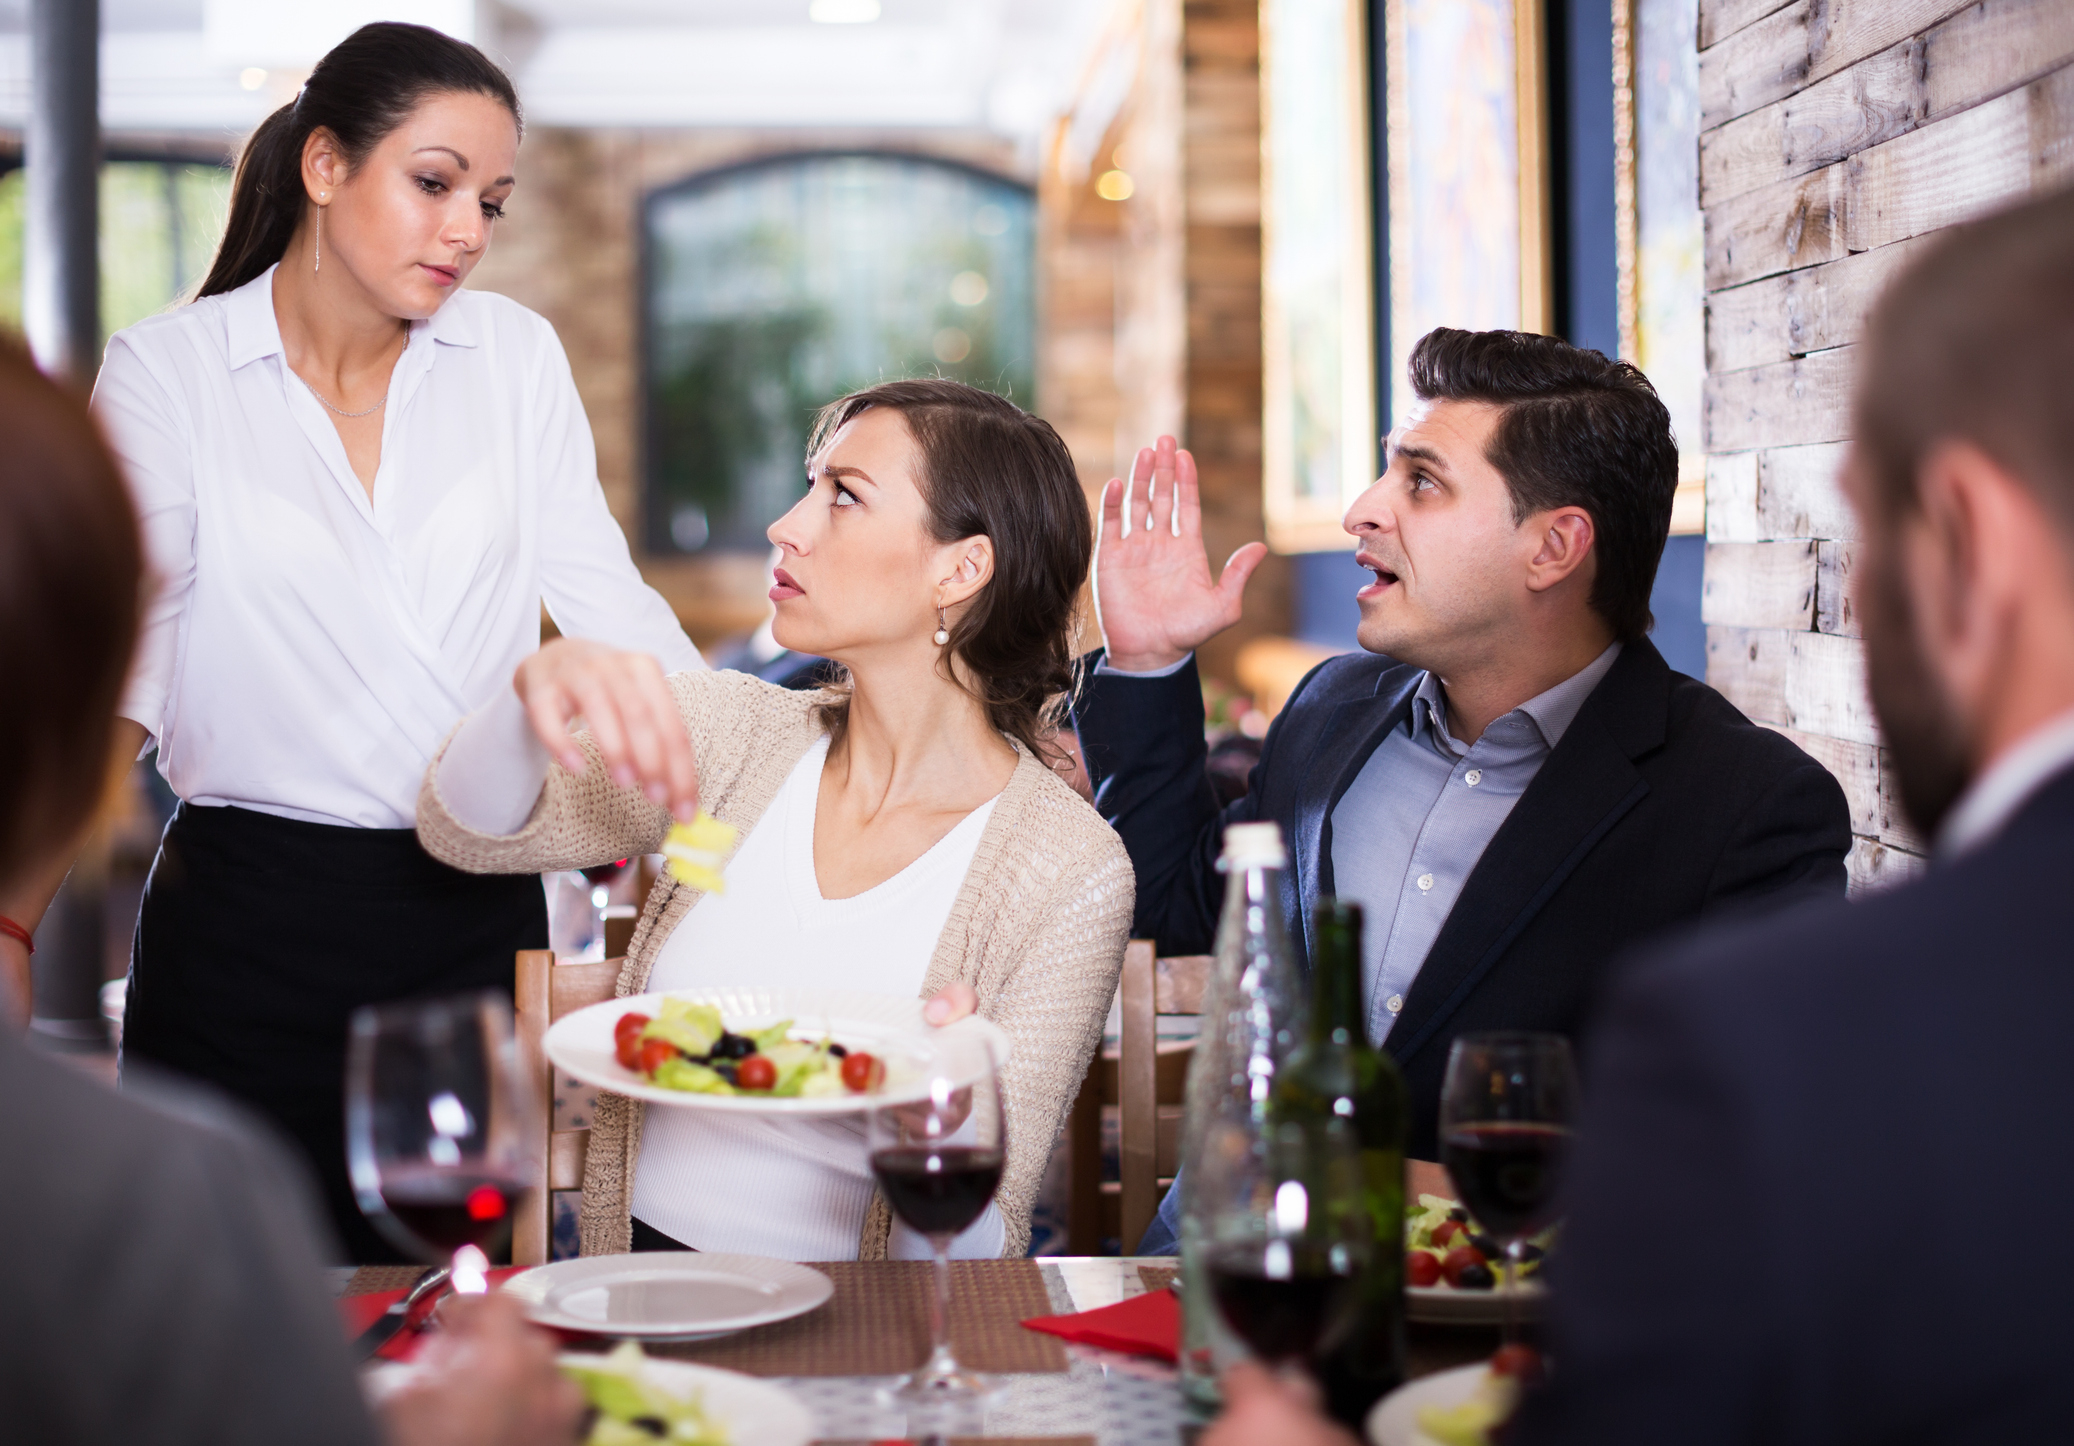 A waiter engaging with a table of rude customers